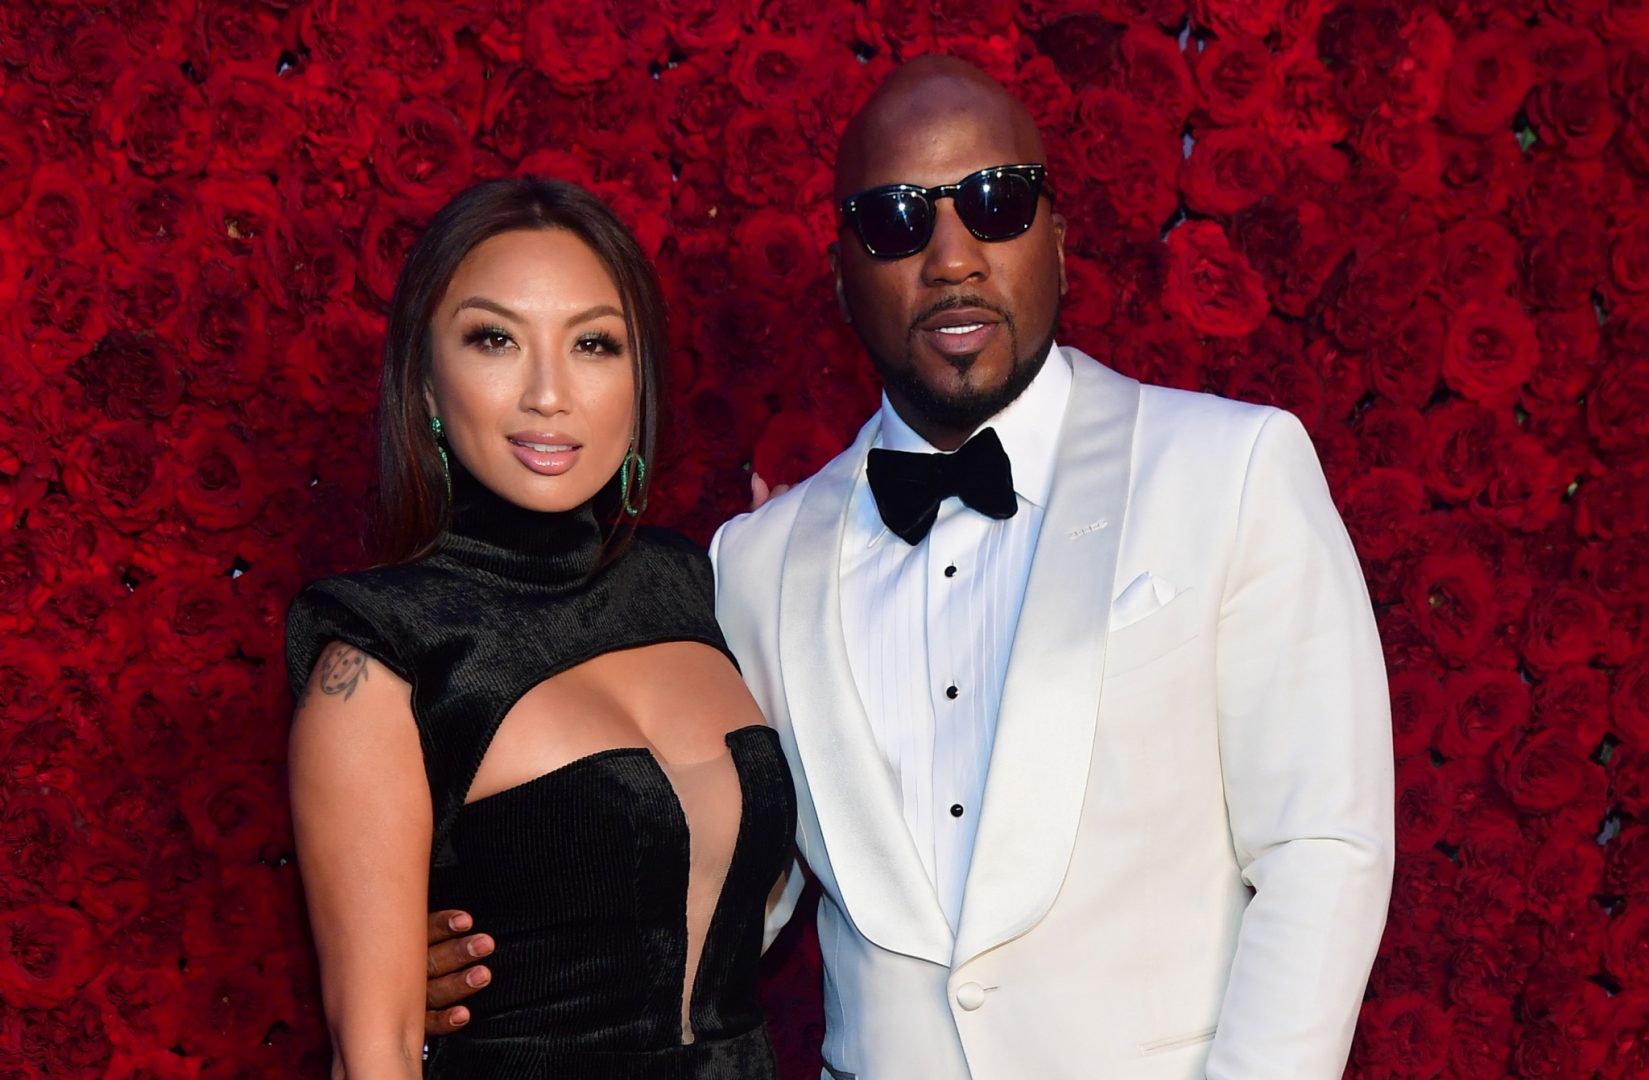 Jeezy and Jeannie Mai are still living together